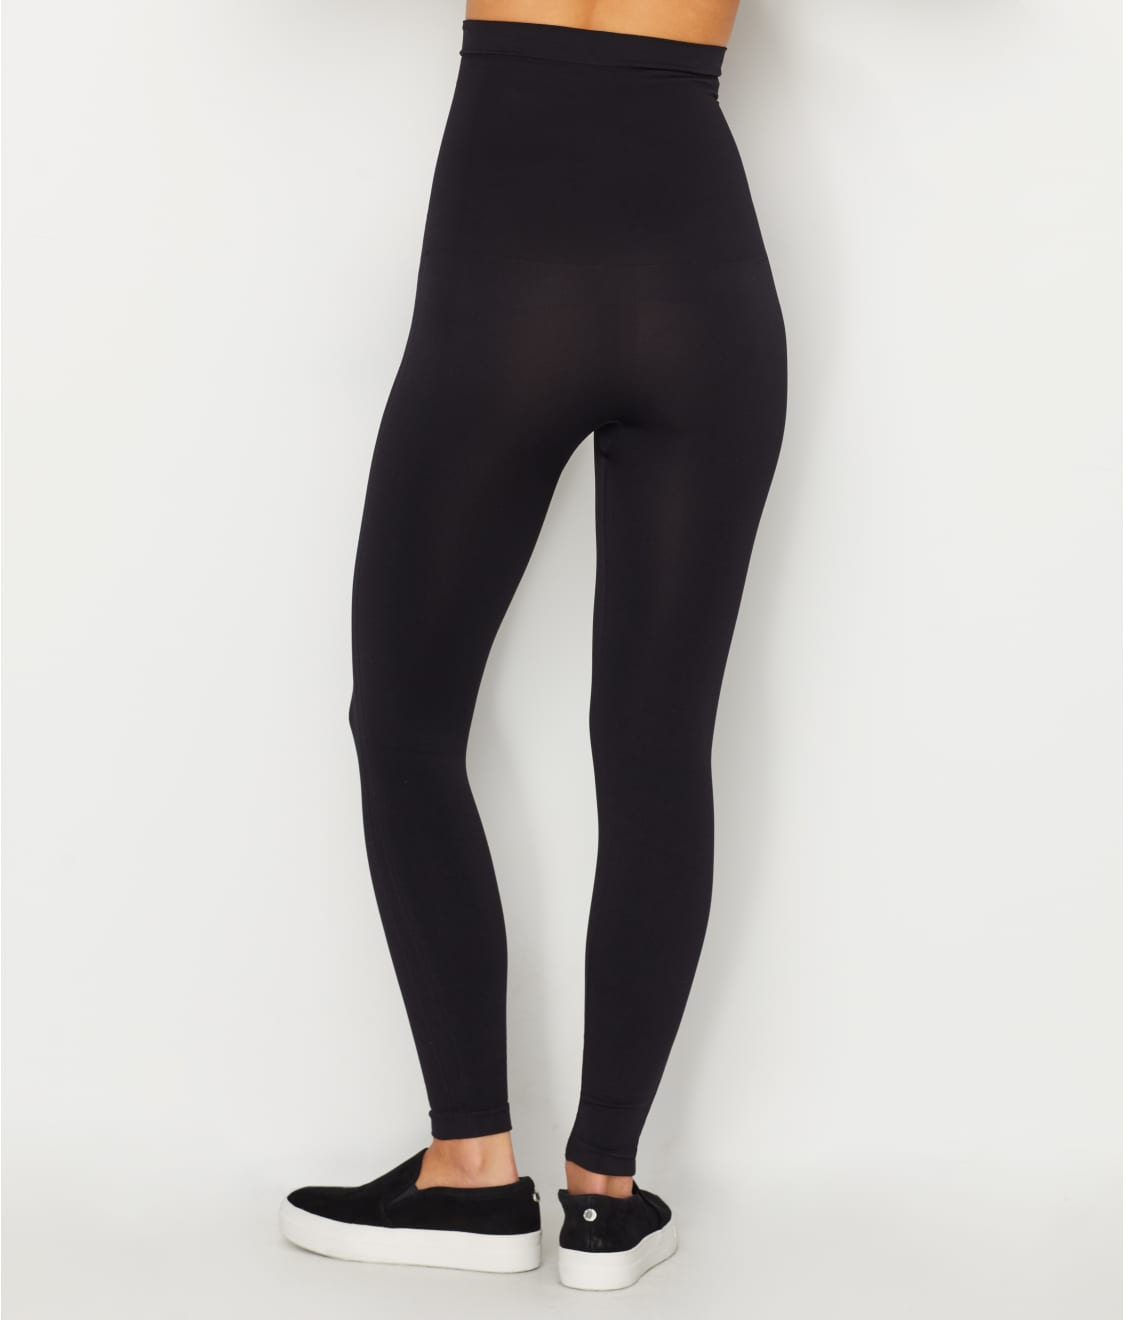 Spanx Very Black Look at me Now Seamless Leggings 1X New Shapewear